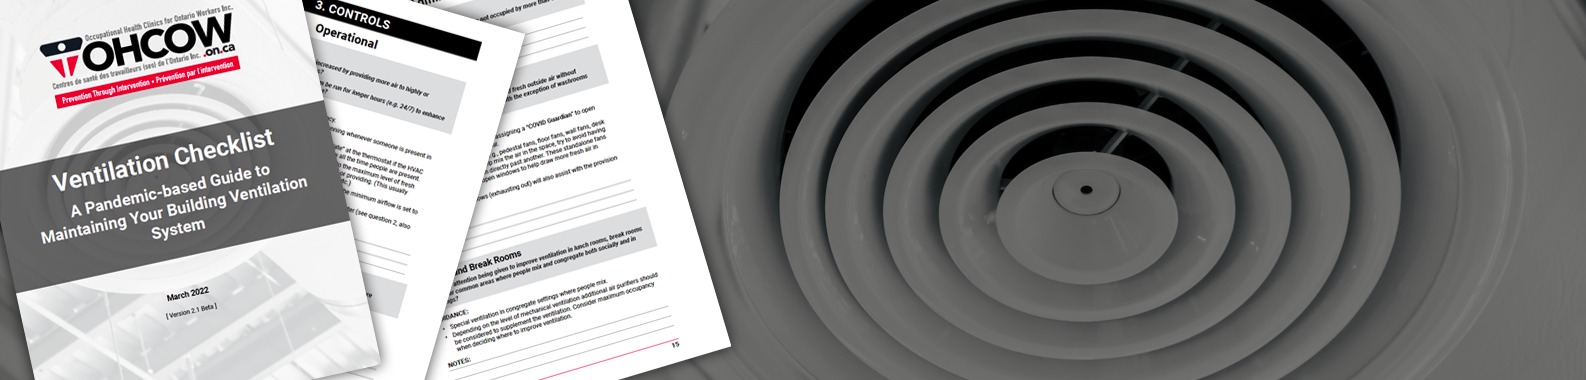 Background image of a ceiling ventilation fan overlayed with snapshots of the OHCOW Ventilation Checklist document